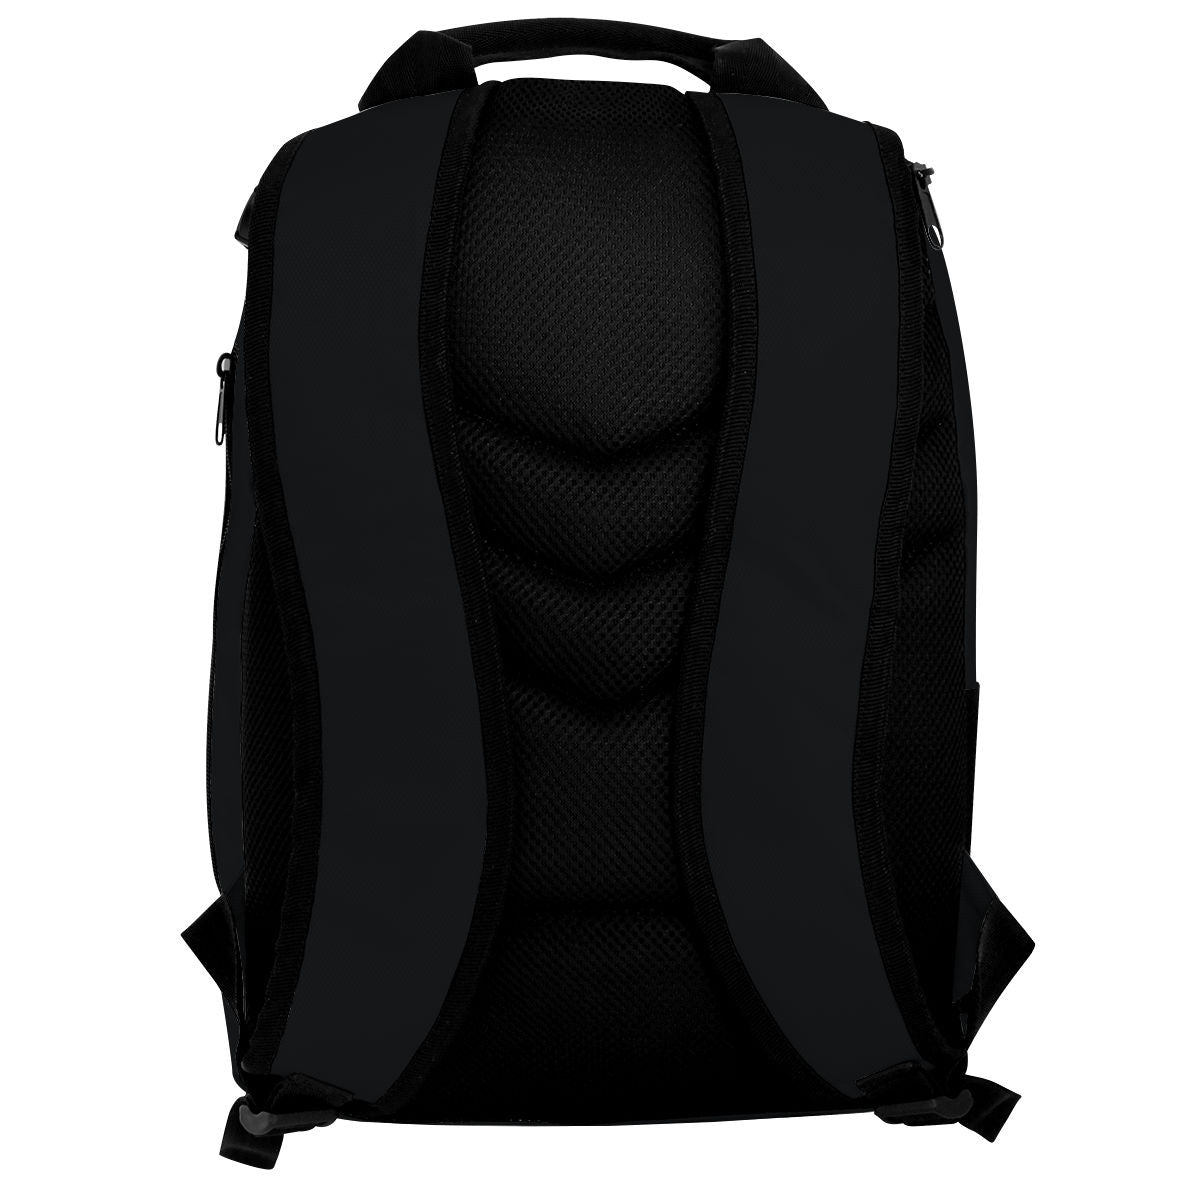 Template10 - Backpack